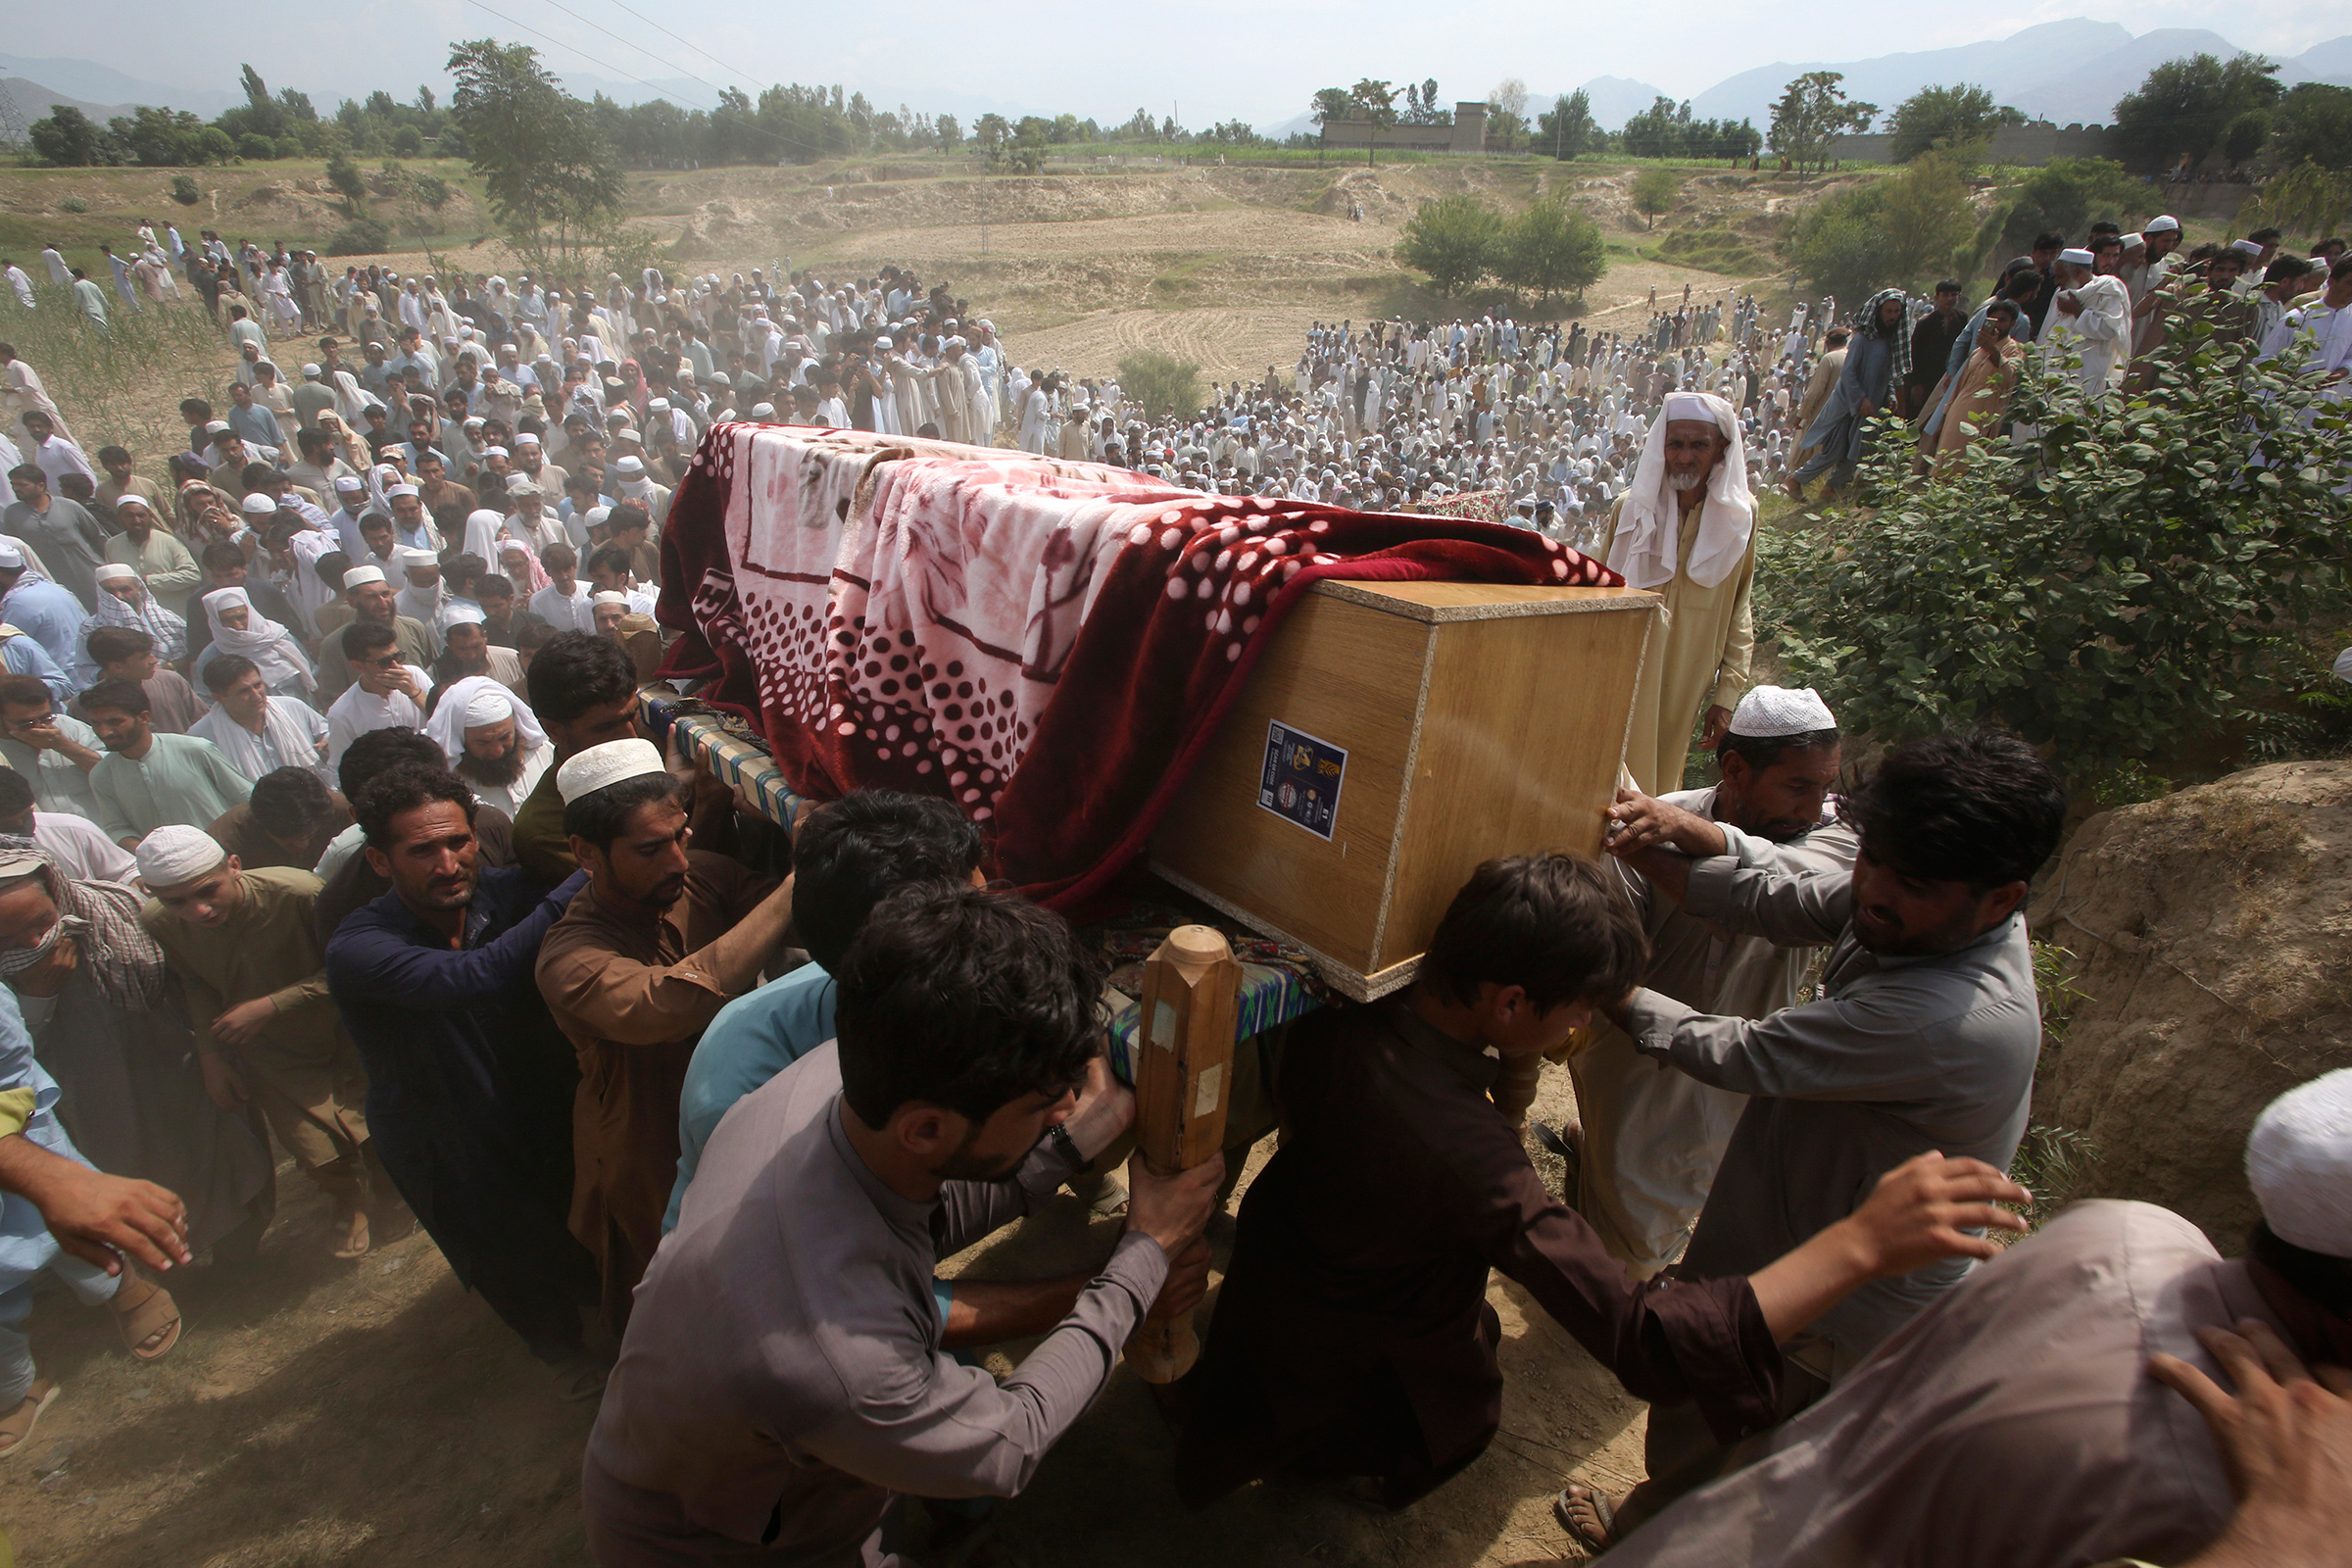 Relatives and mourners carry the casket of a victim killed in a suicide bomber attack in Bajaur district, Pakistan, on July 31.